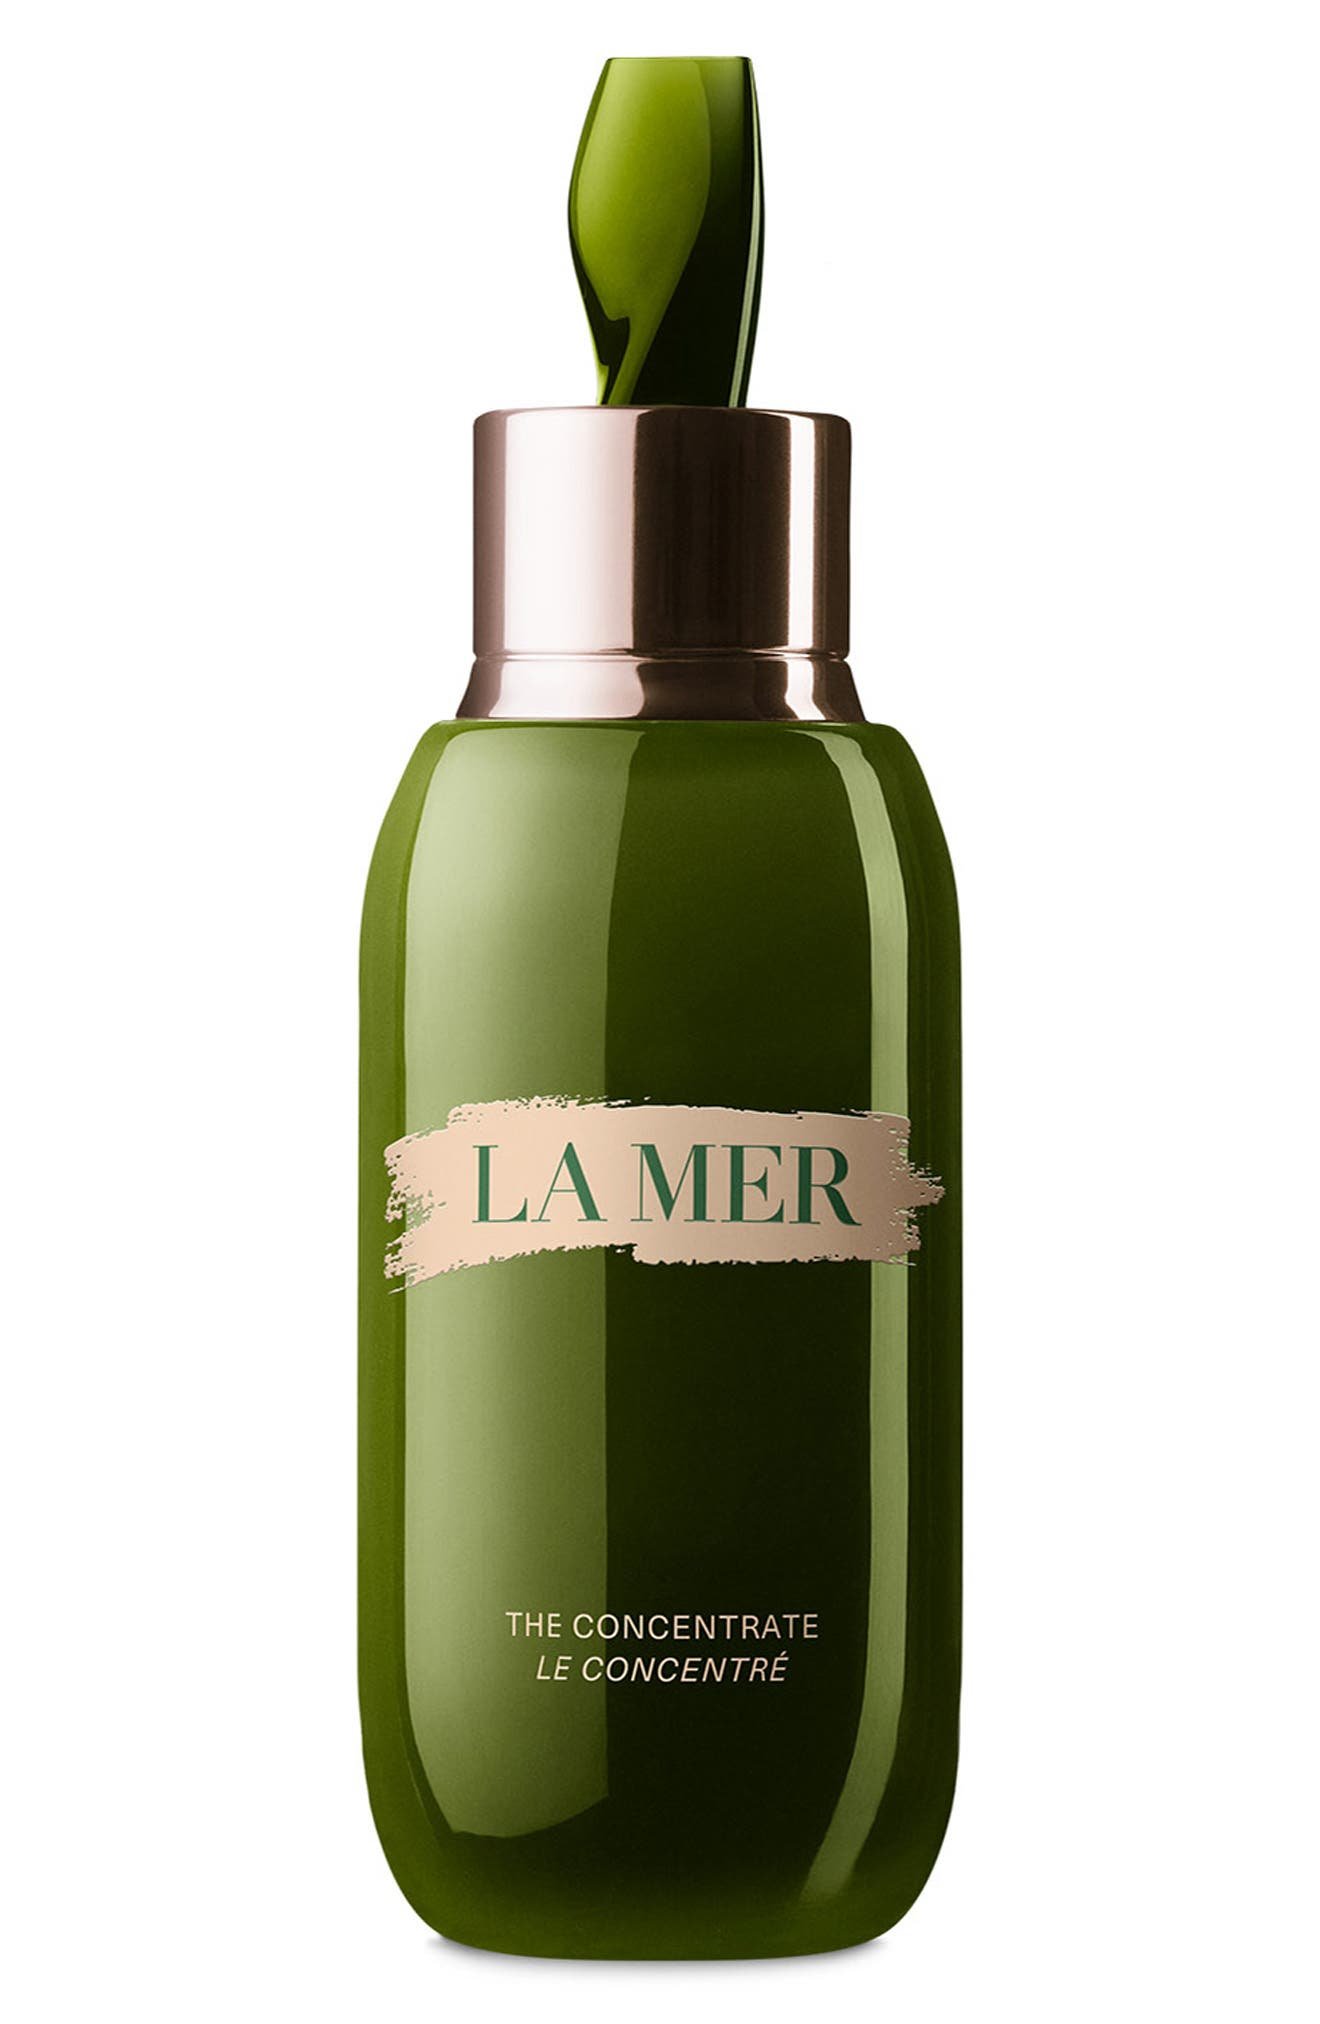 4 Solid Dupes For La Mer’s The Concentrate Serum That Are (Almost) Just As Good